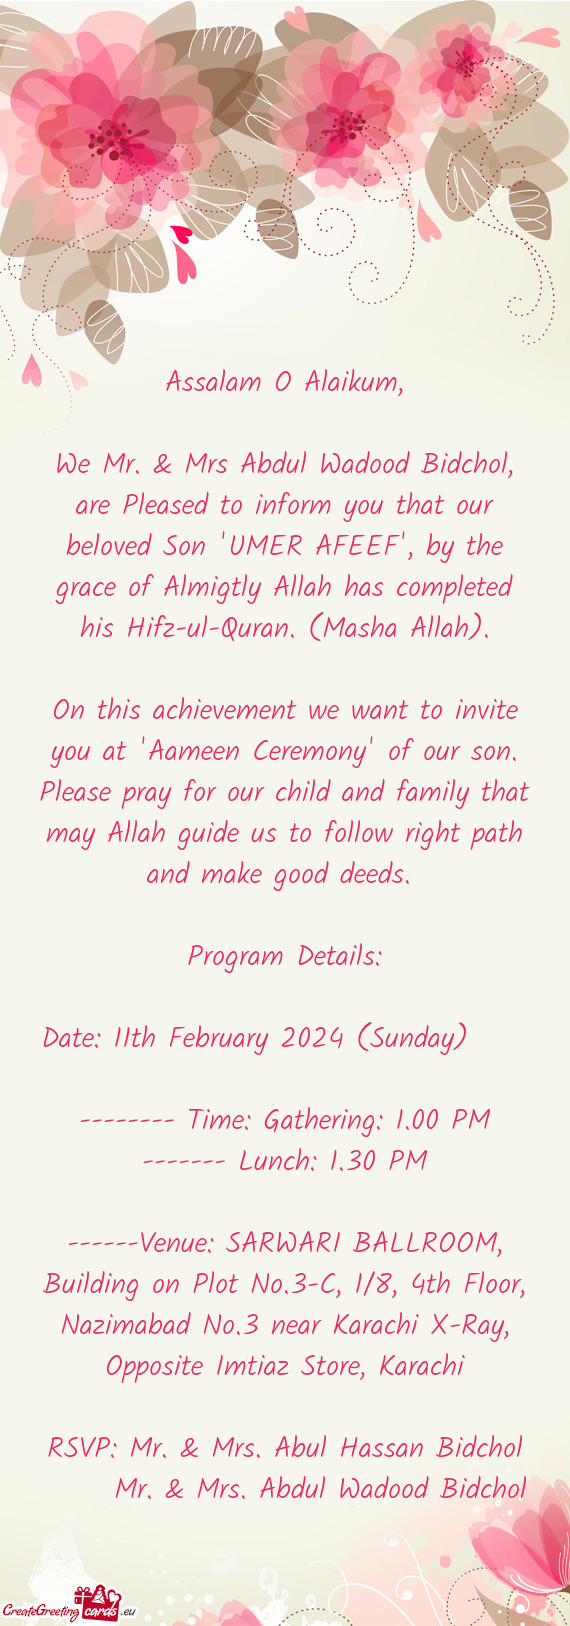 We Mr. & Mrs Abdul Wadood Bidchol, are Pleased to inform you that our beloved Son "UMER AFEEF", by t